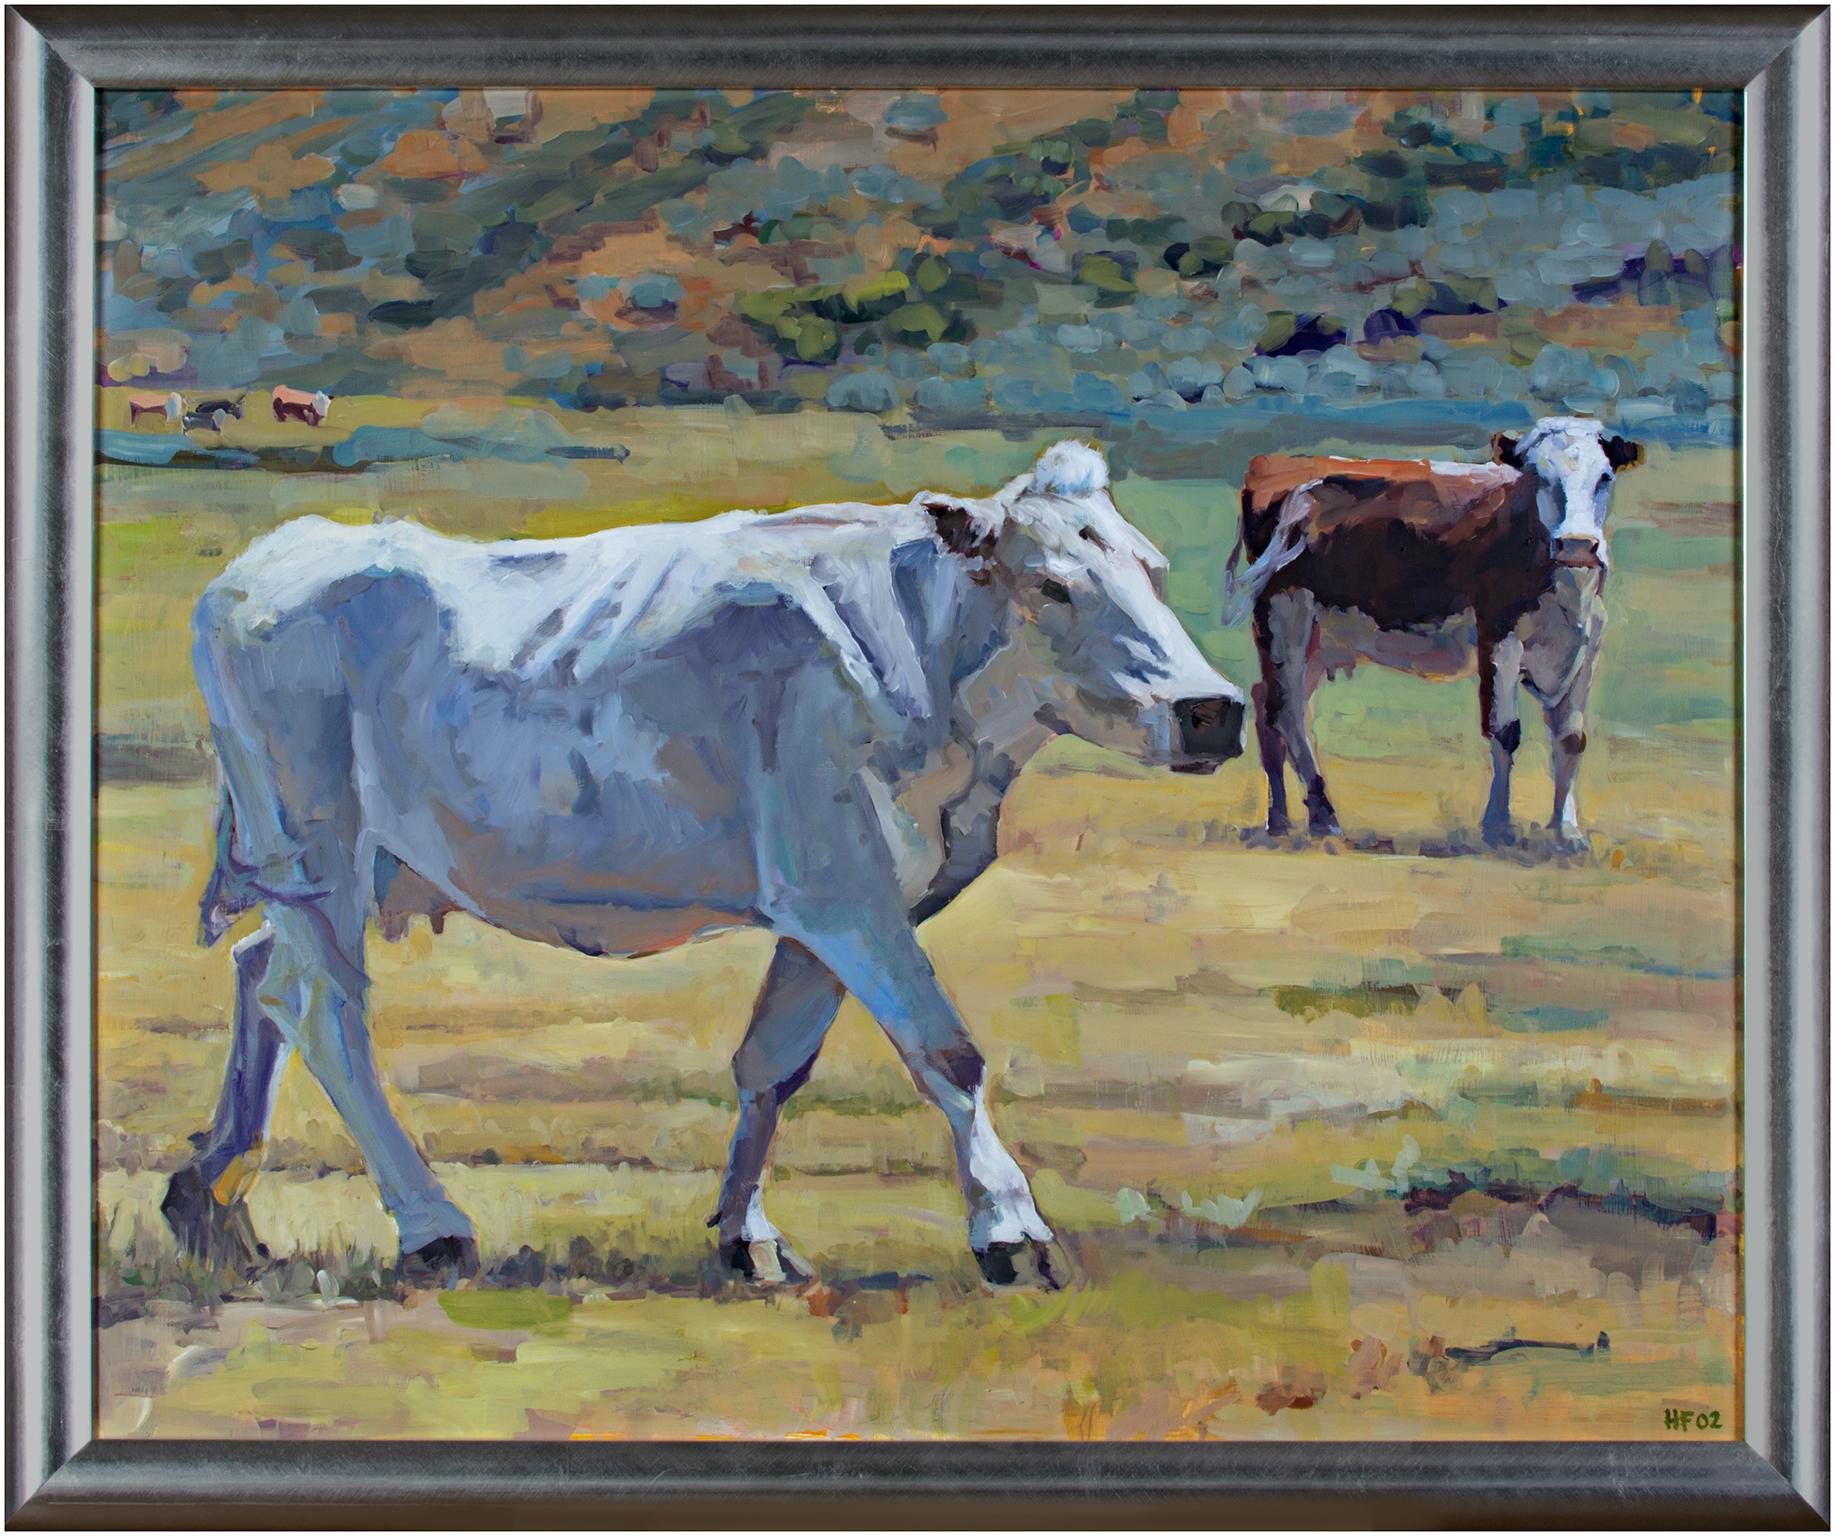 Contemporary landscape oil painting cows grass field mountain scene - Gray Animal Painting by Heather Foster